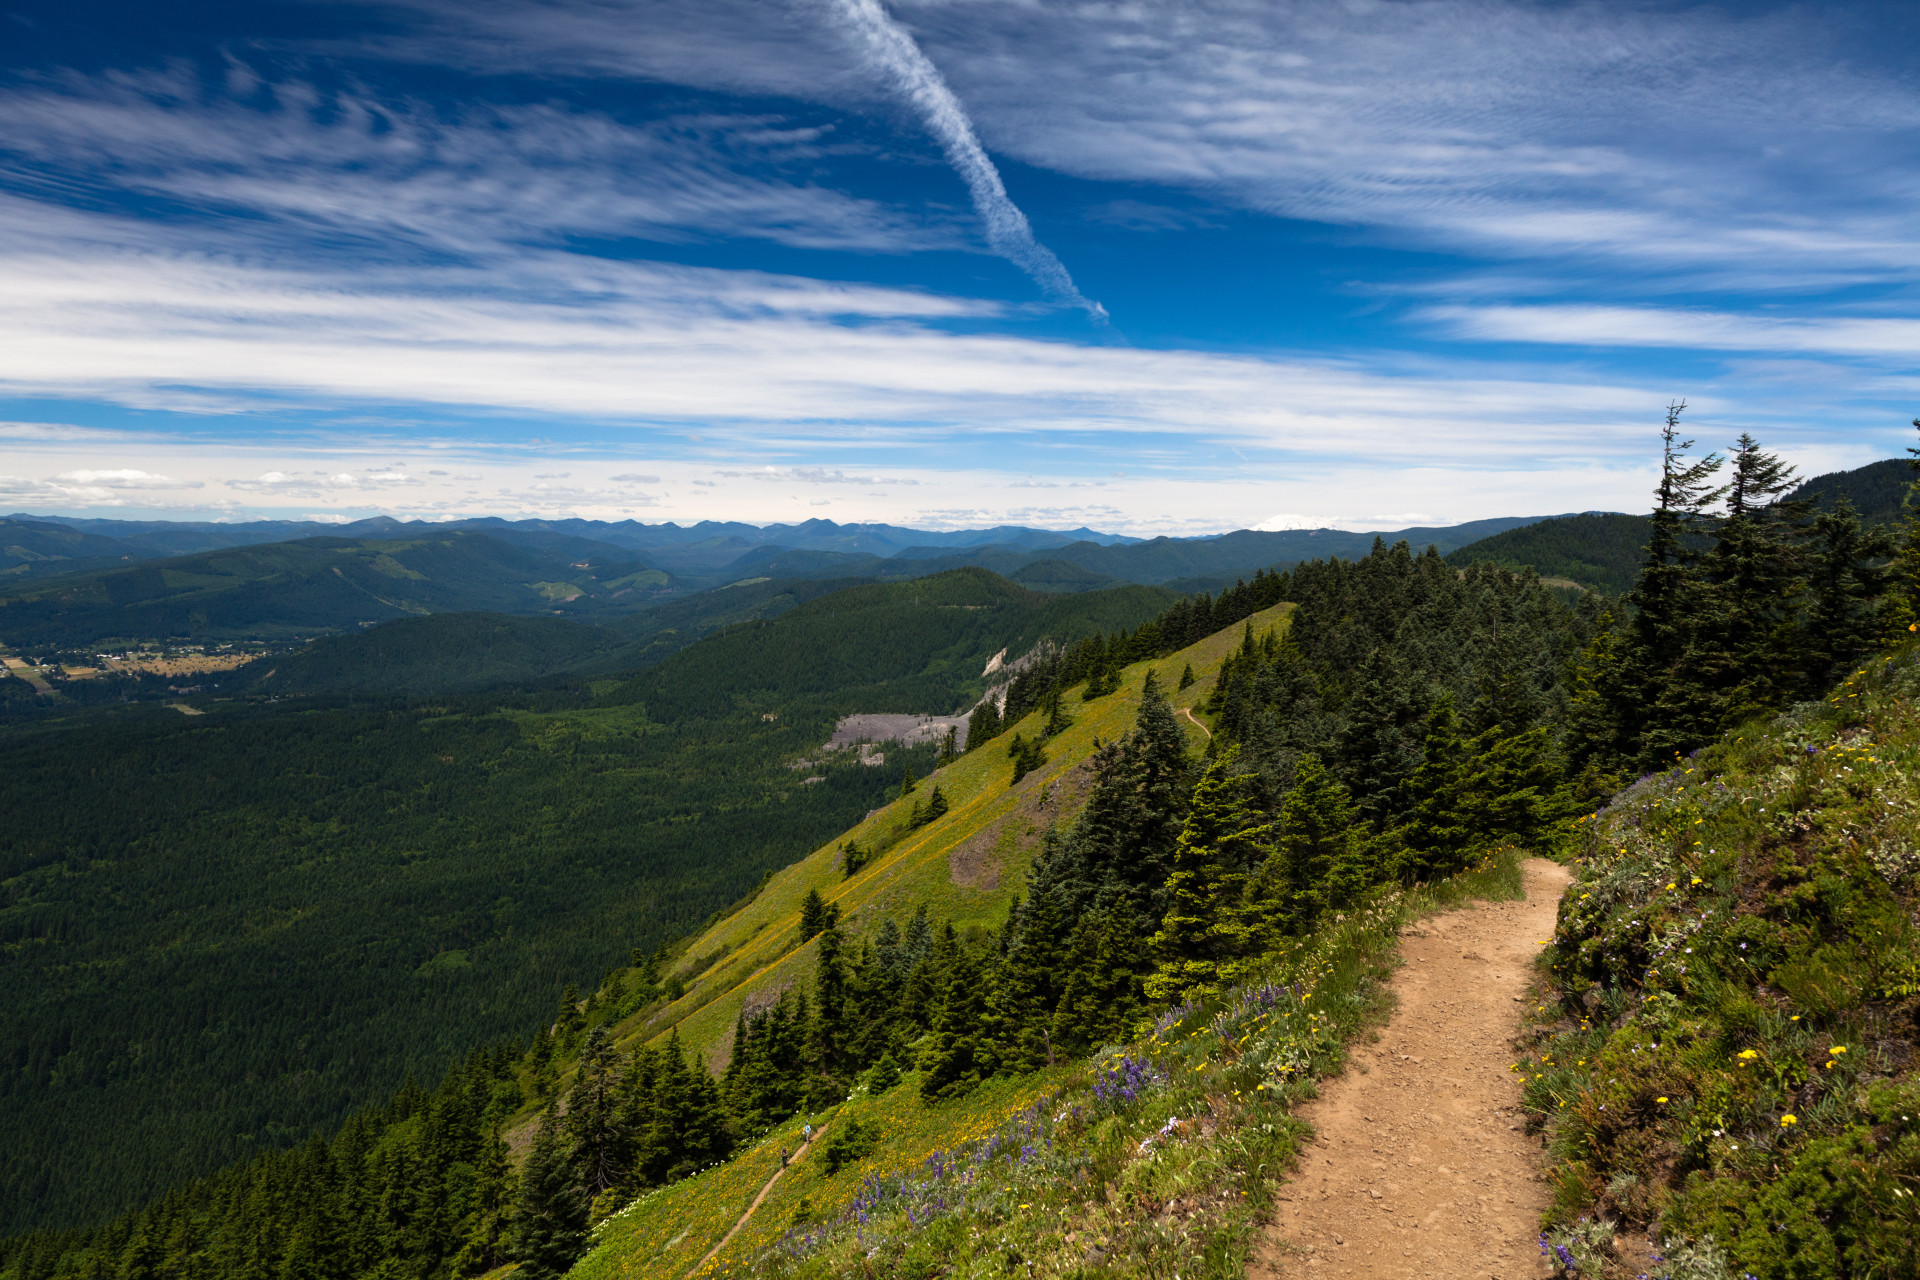 This exceptional 6.9-mile hiking trail rises up to 2,948 ft at its peak, and provides incredible views of the famous Gorge down below. Some of the most popular attractions in the area include Mount Hood and Mount St. Helens.<p>You may also like:<a href="https://www.starsinsider.com/n/472183?utm_source=msn.com&utm_medium=display&utm_campaign=referral_description&utm_content=247050v5en-us"> Missing people who were found alive</a></p>